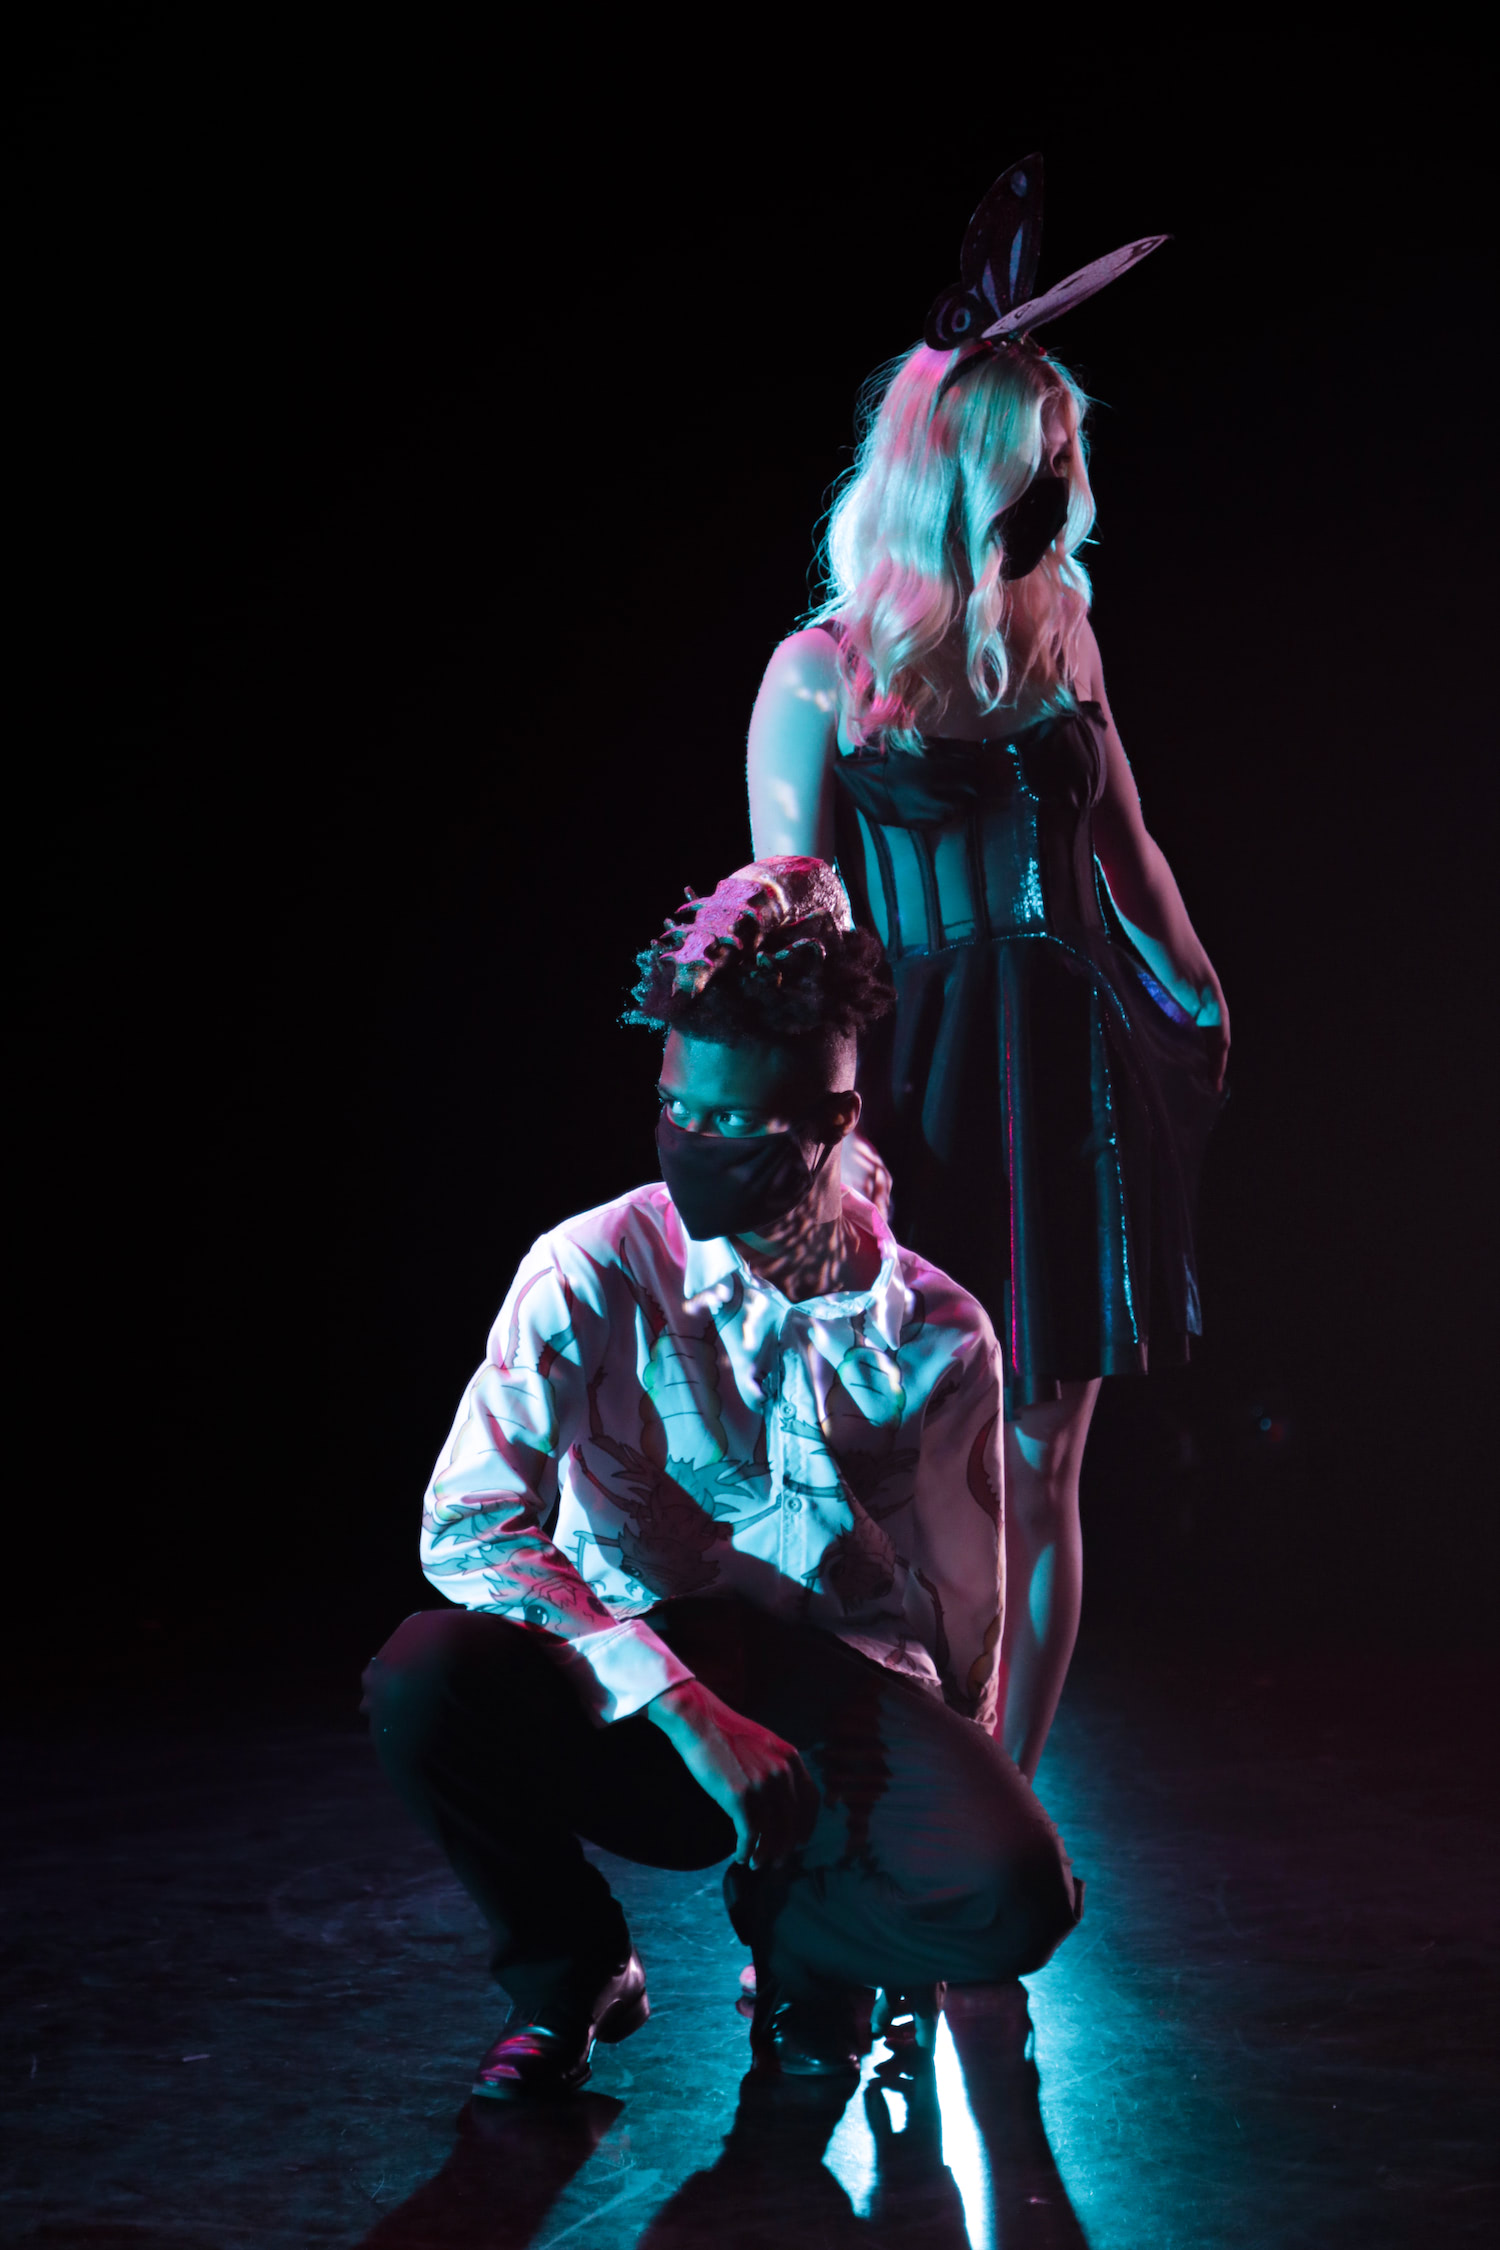 This image is of the models in special studio lighting. The woman stands next to the crouching man. They are bathed in purple and blue light.